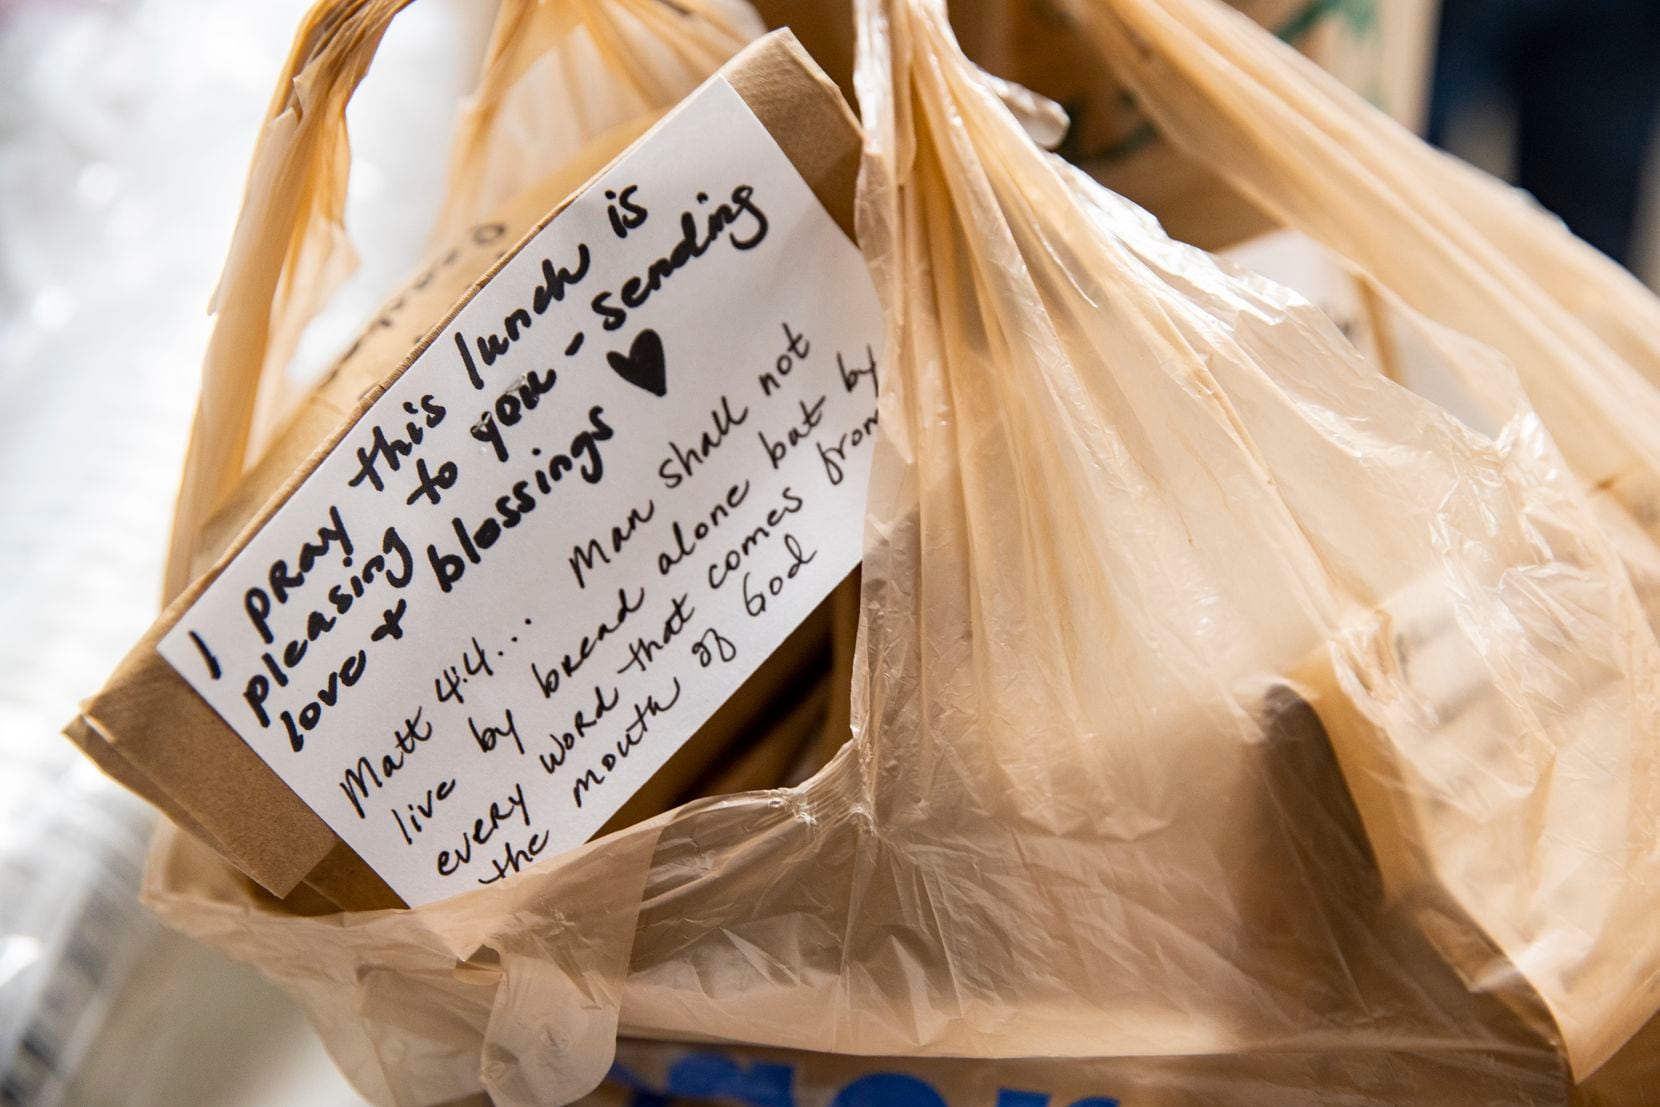 Hand-written notes are placed in the bags of those receiving meals at Cornerstone.